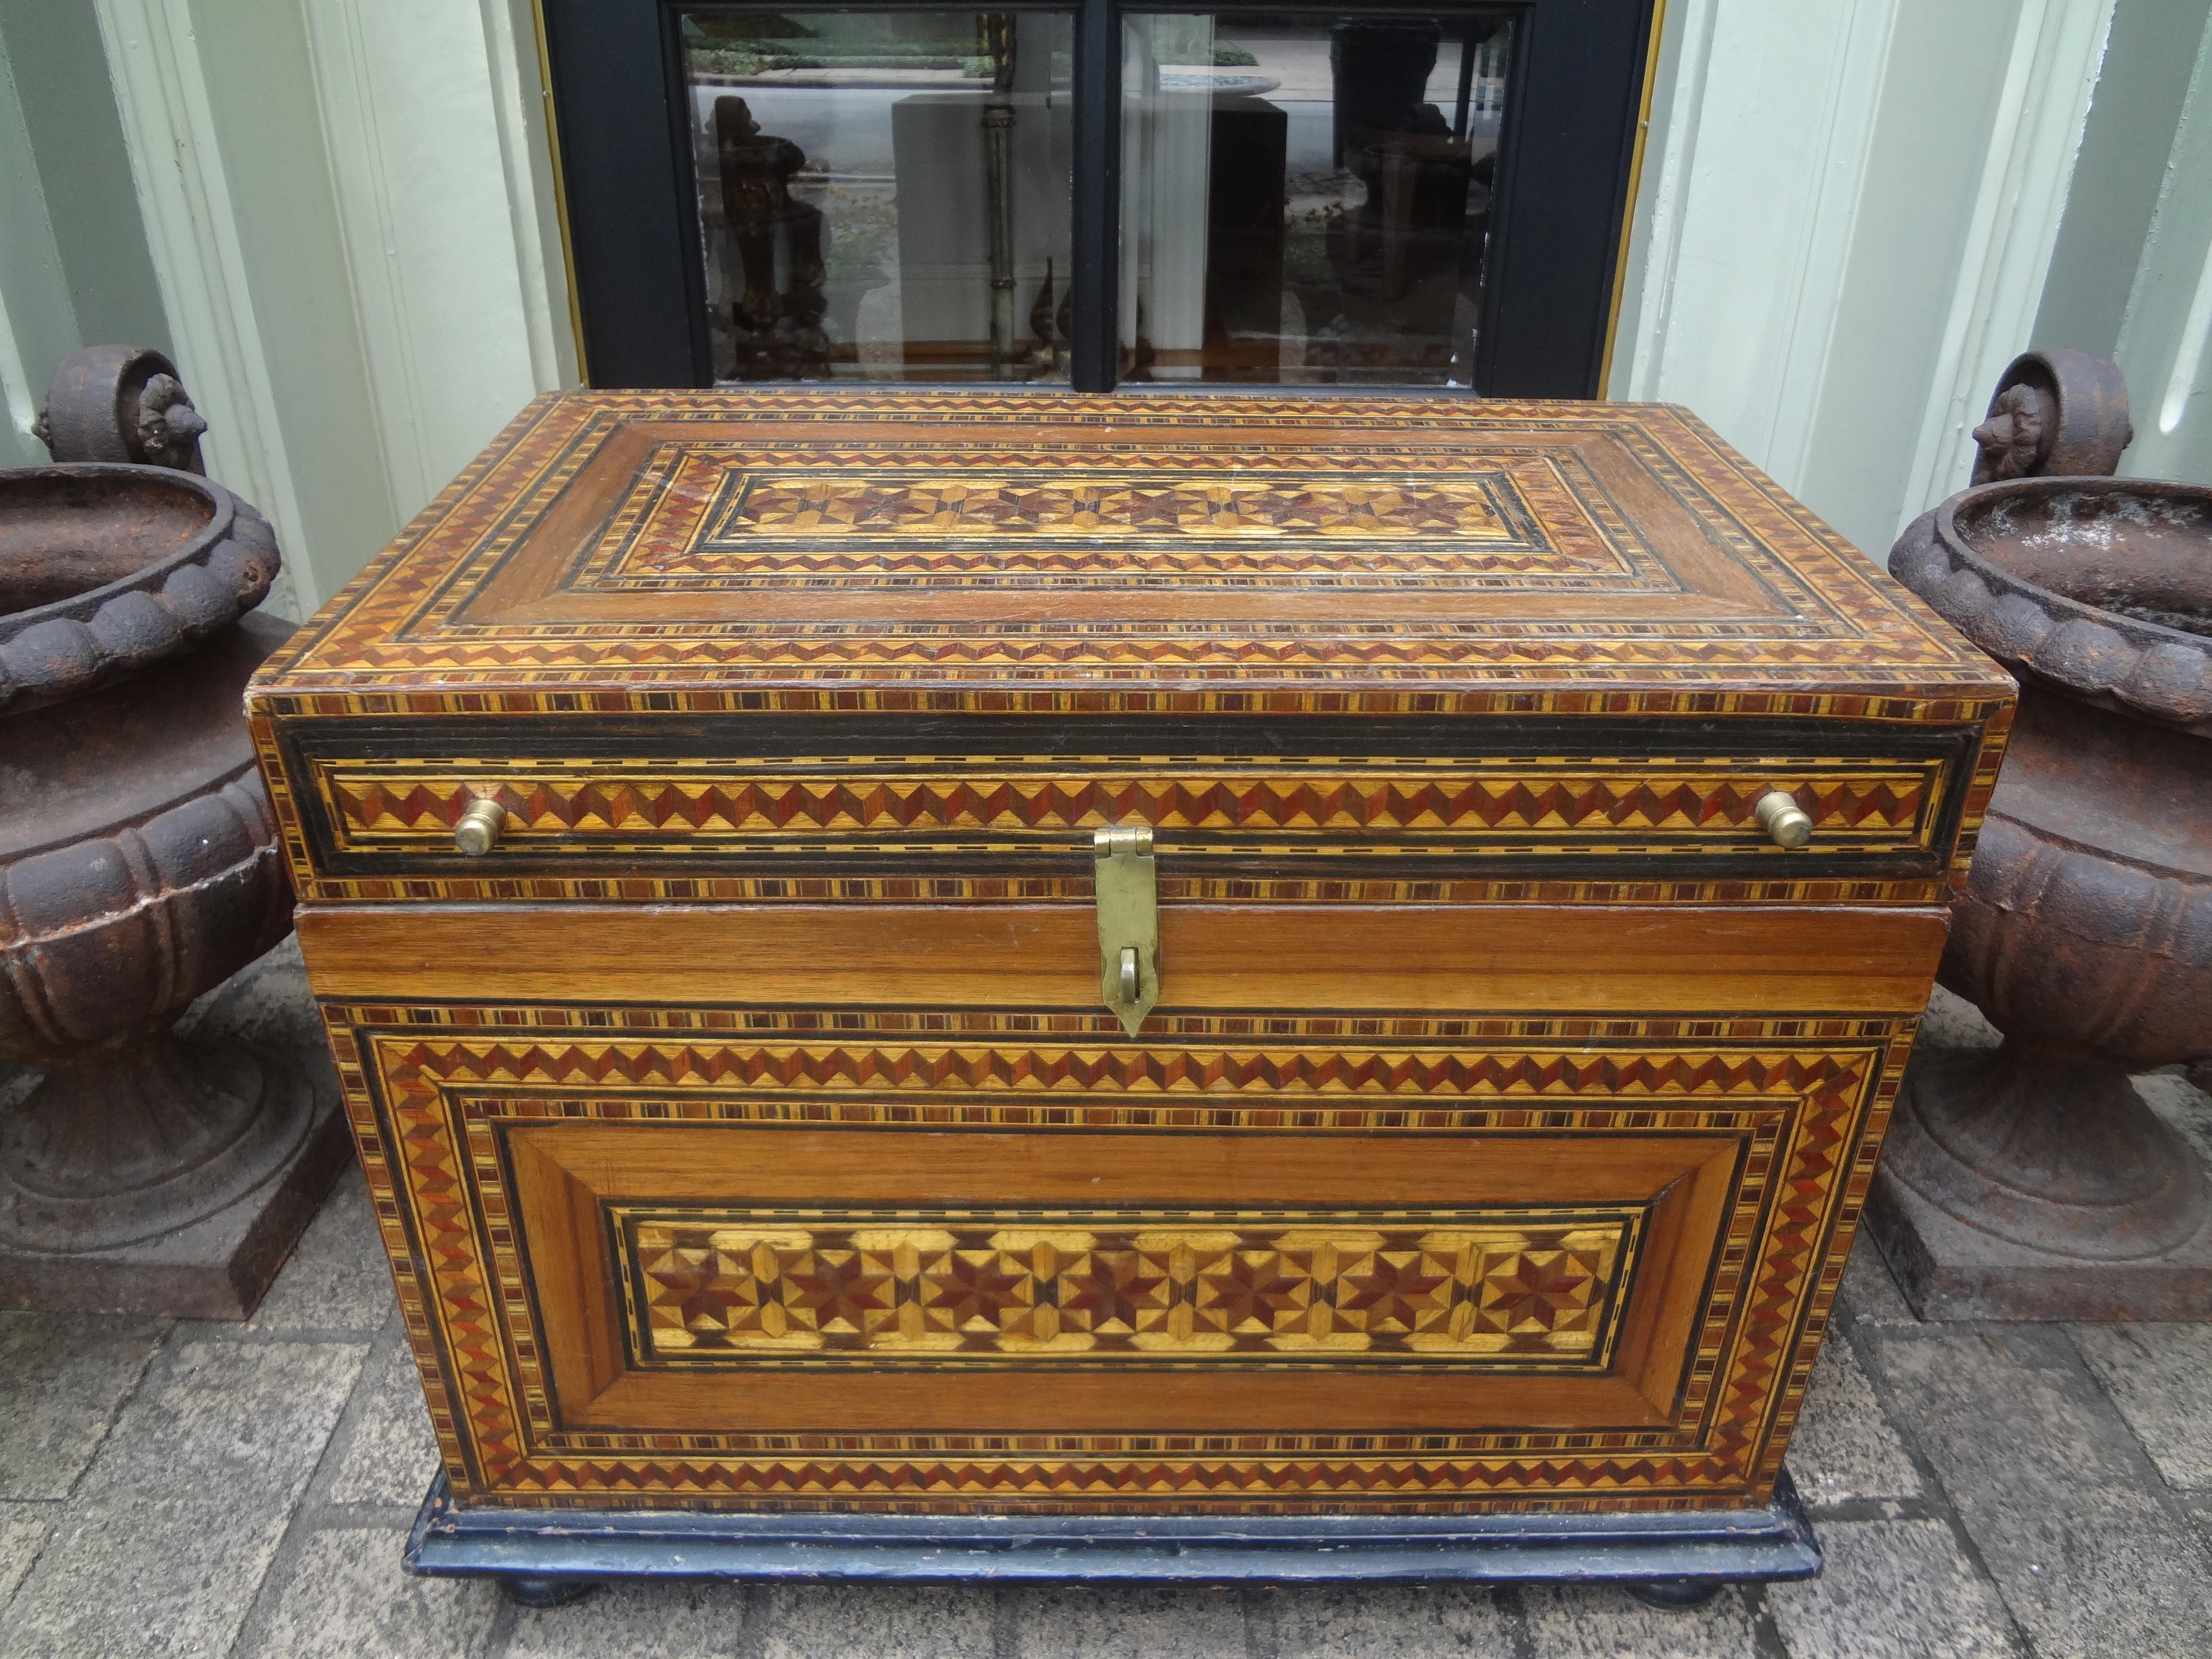 Antique Moroccan coffer, trunk or box. This stunning large Moroccan box is inlaid with a variety of woods including an interior storage compartment with felt lining.
This large Middle Eastern, Syrian, Arabesque decorative box, document box, coffer,